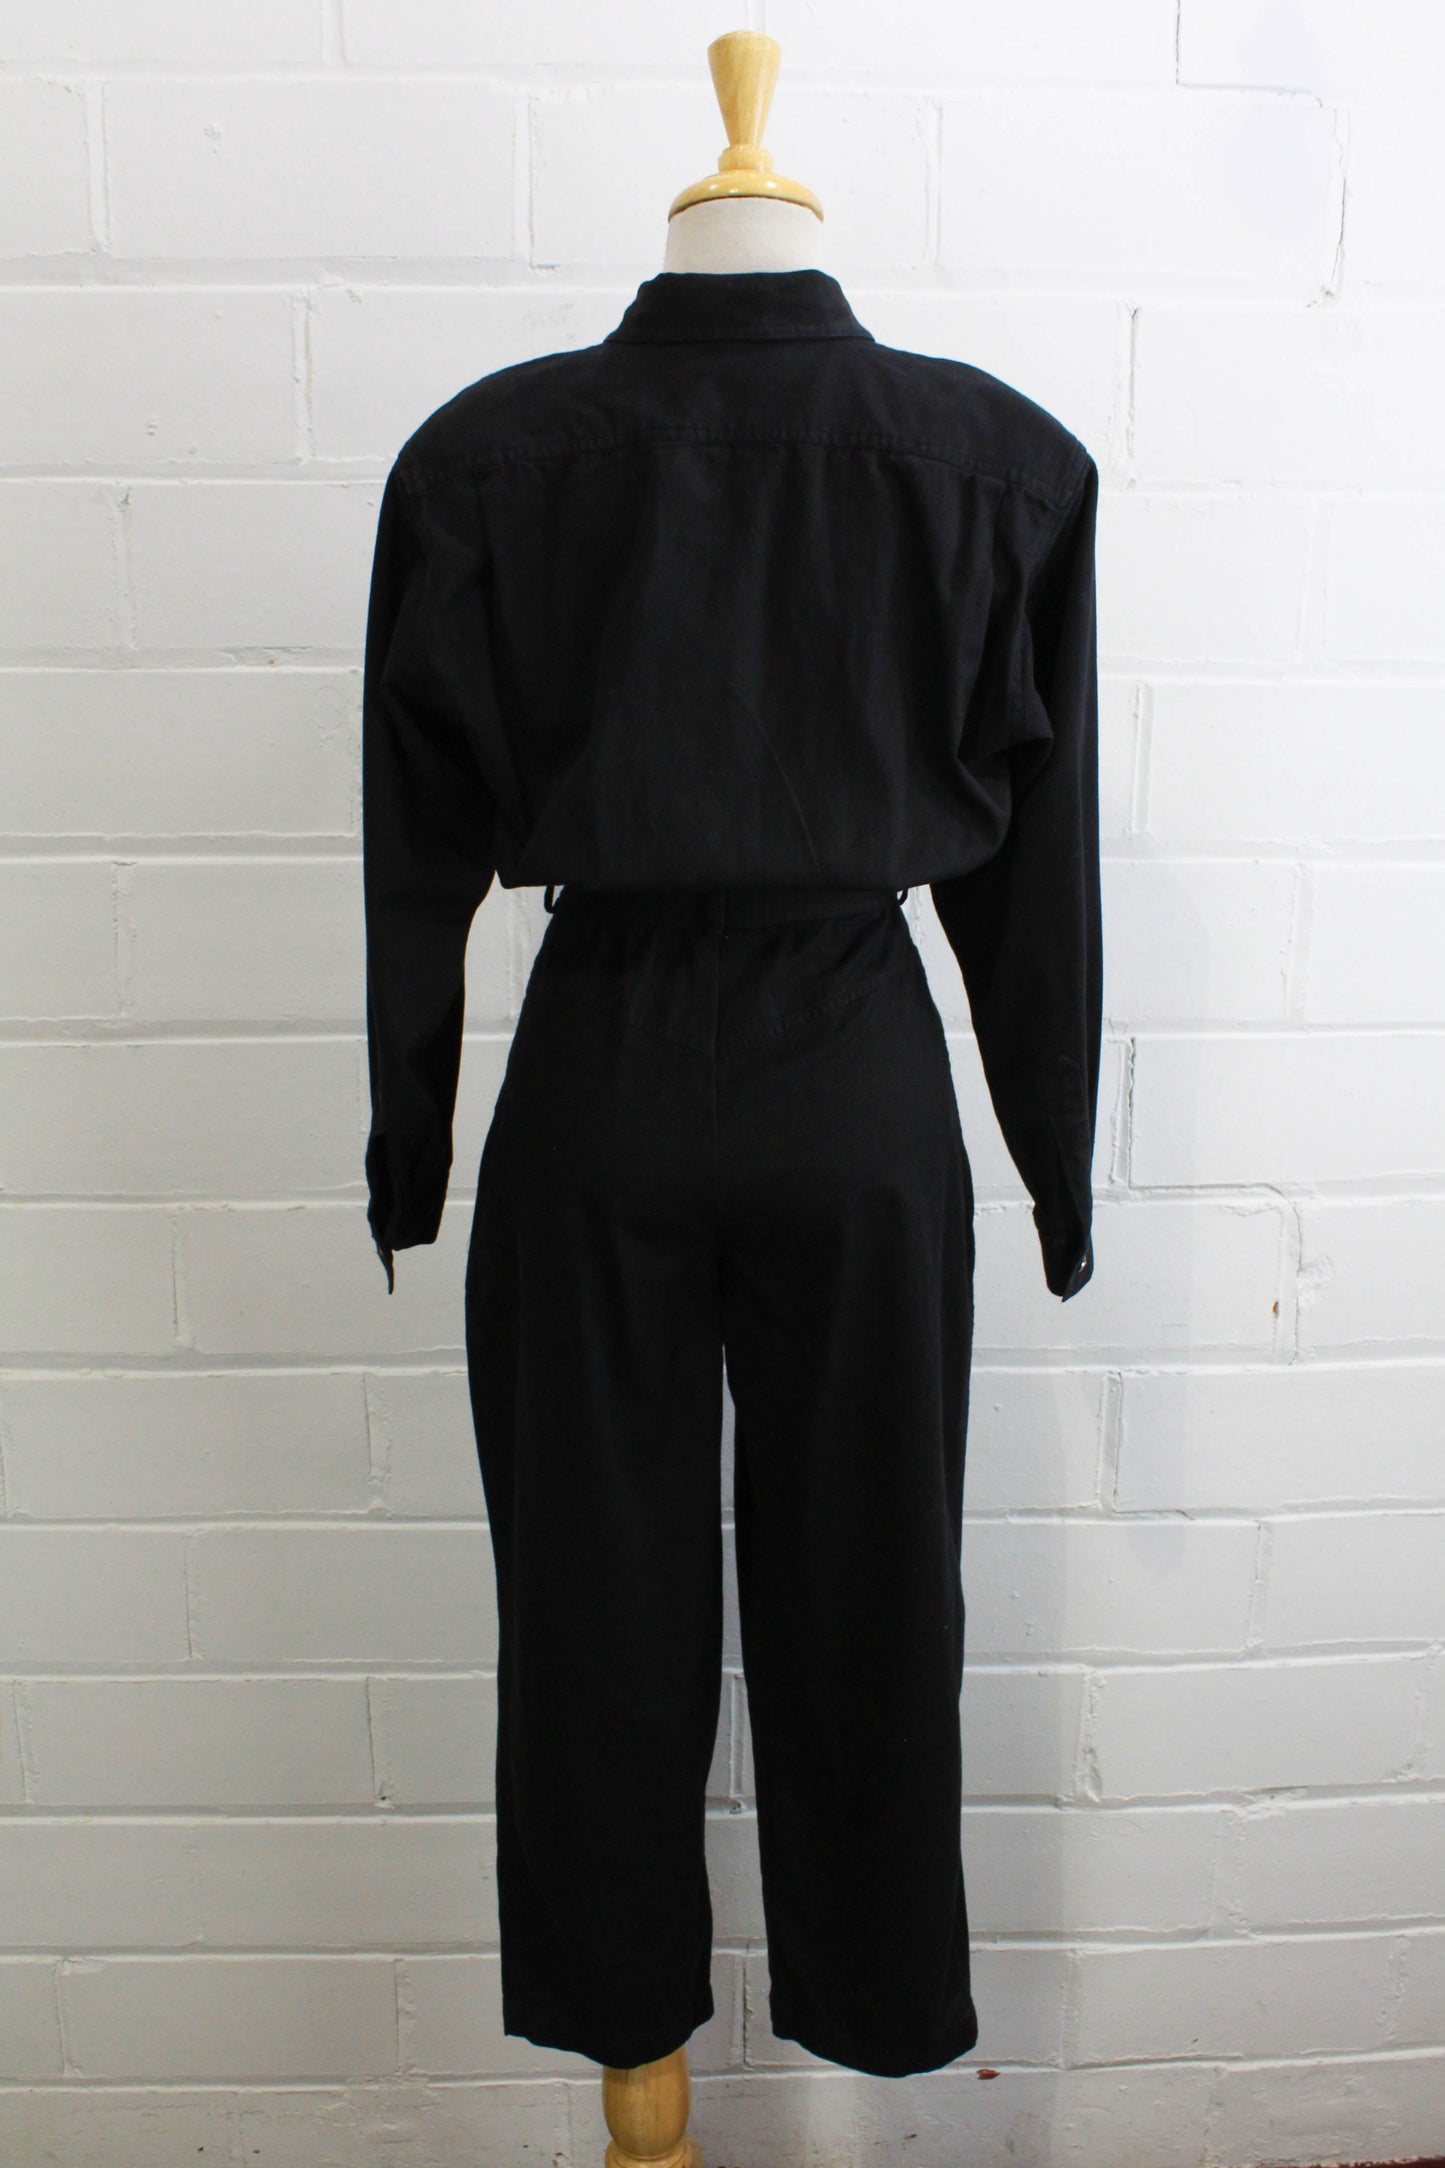 1980s womens jumpsuit black cotton with bib front, collar button up back view